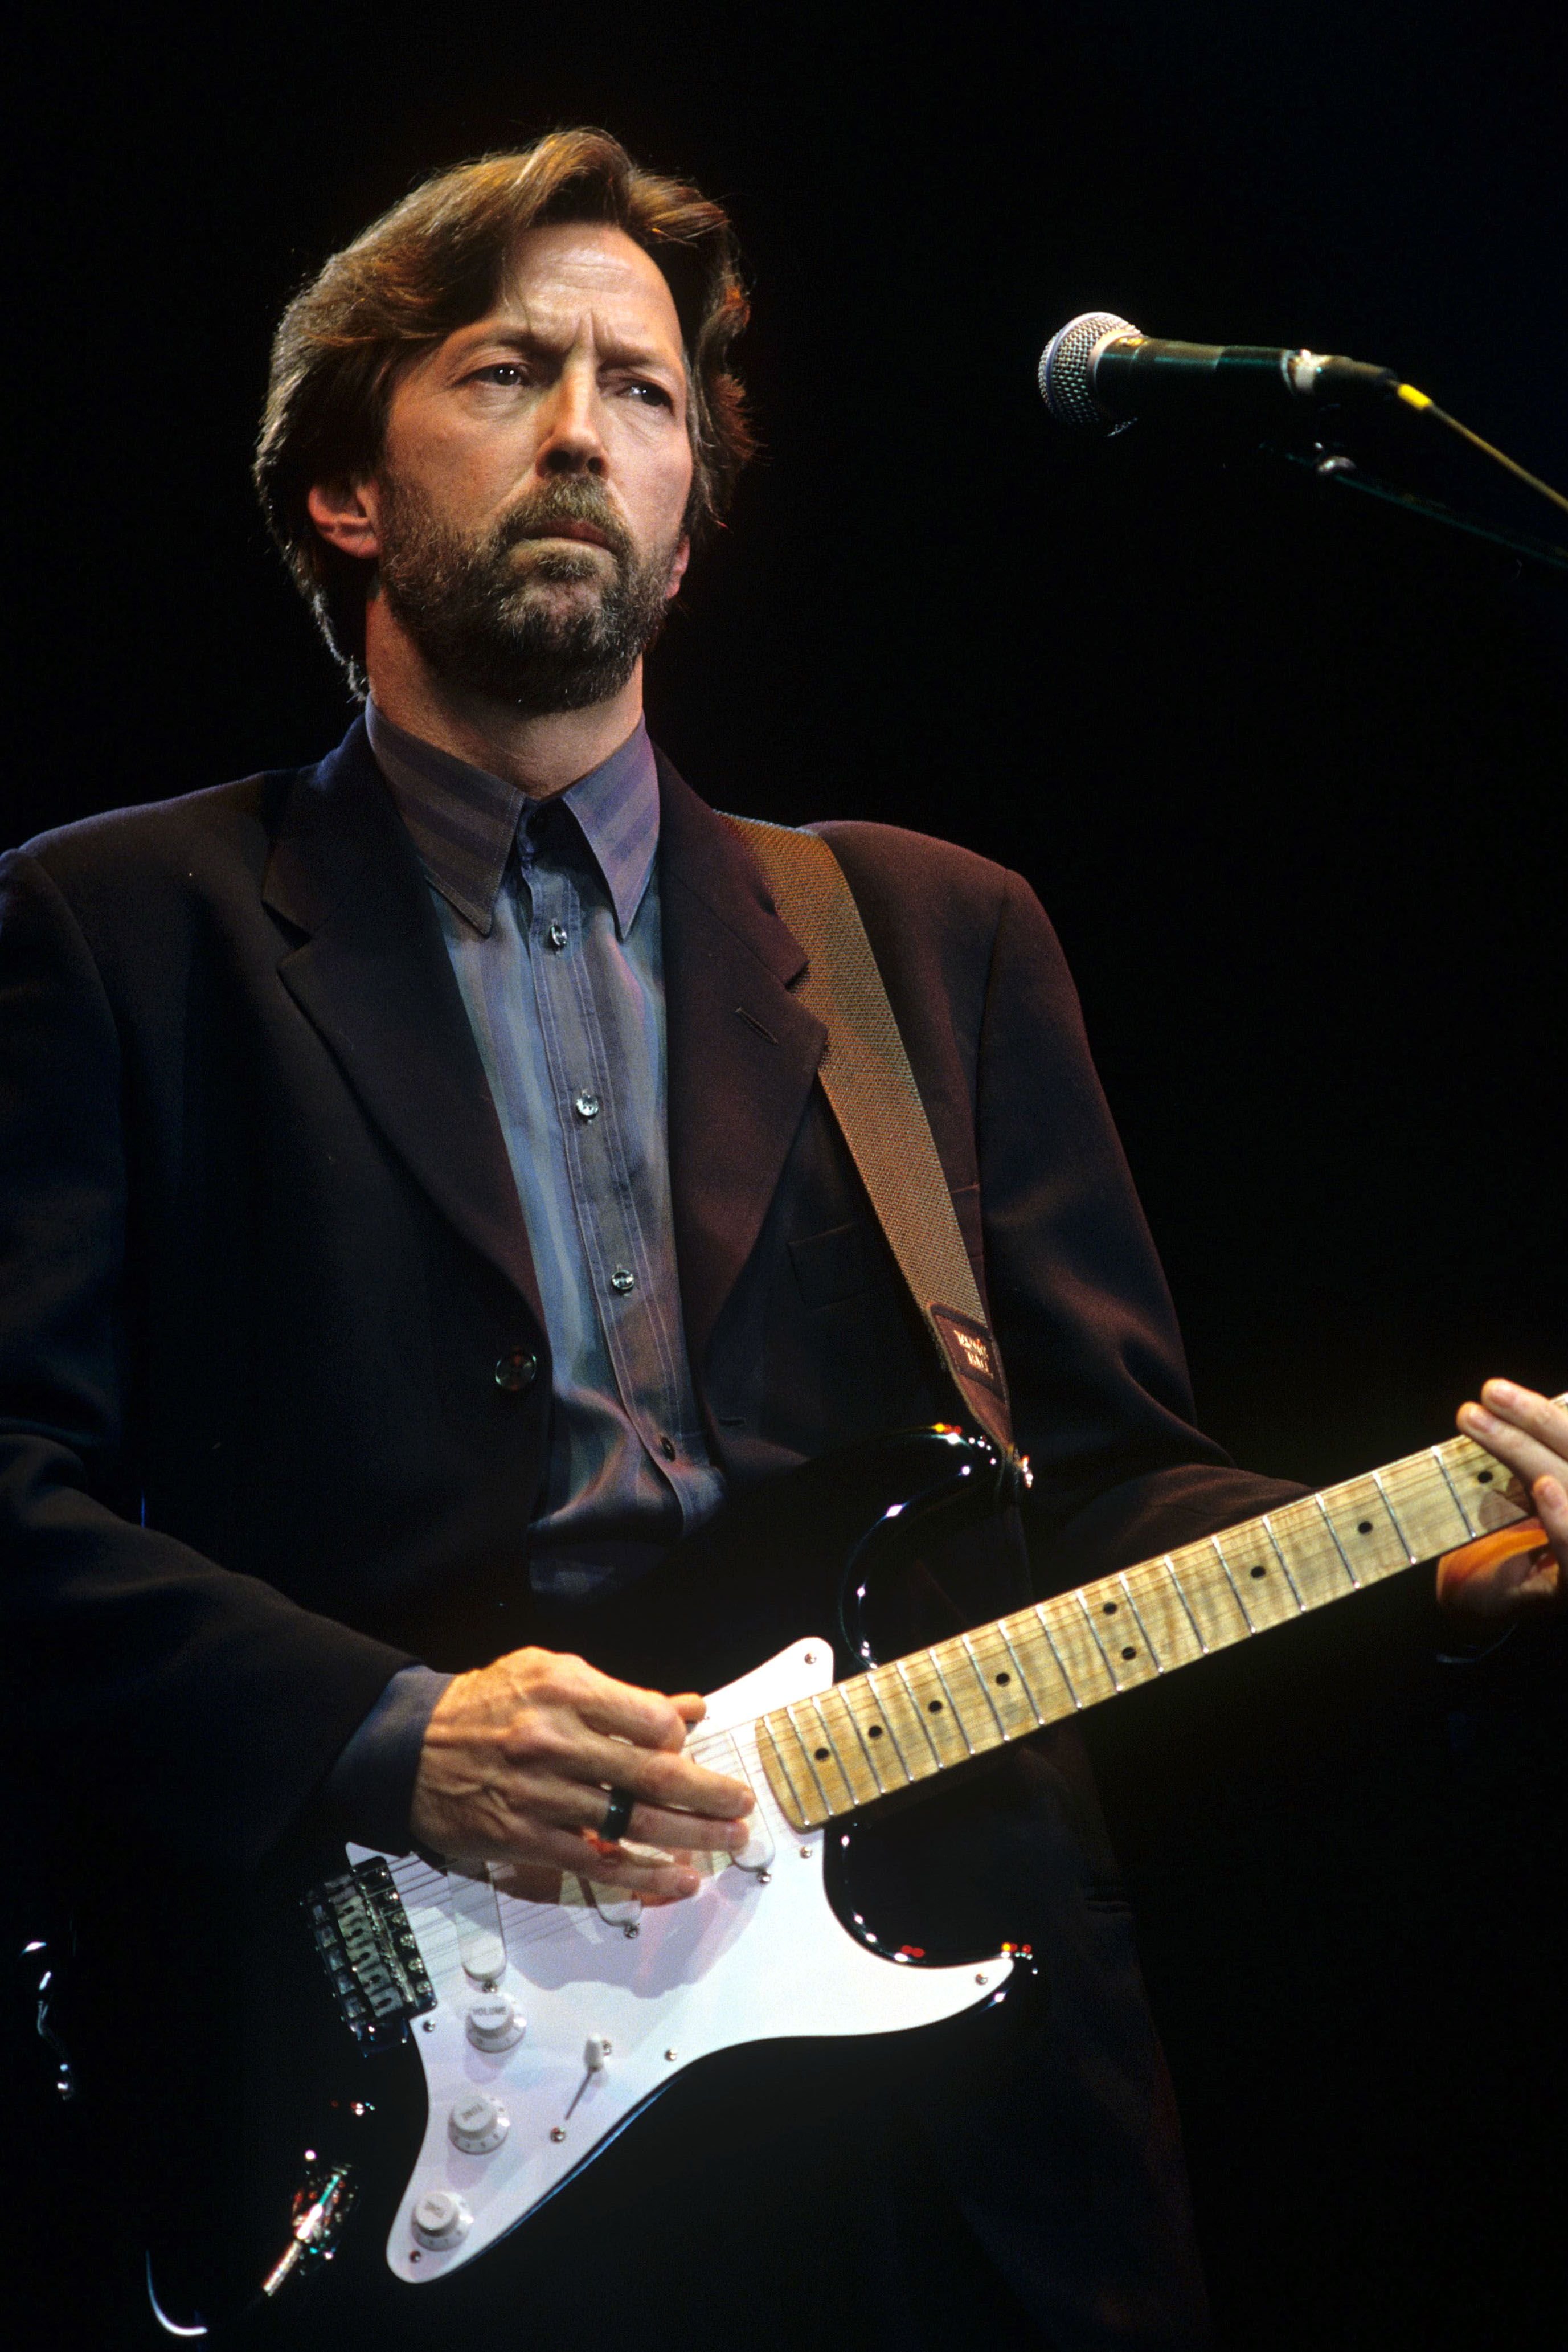 Eric Clapton Lost His Little Son in a Tragic Accident ...